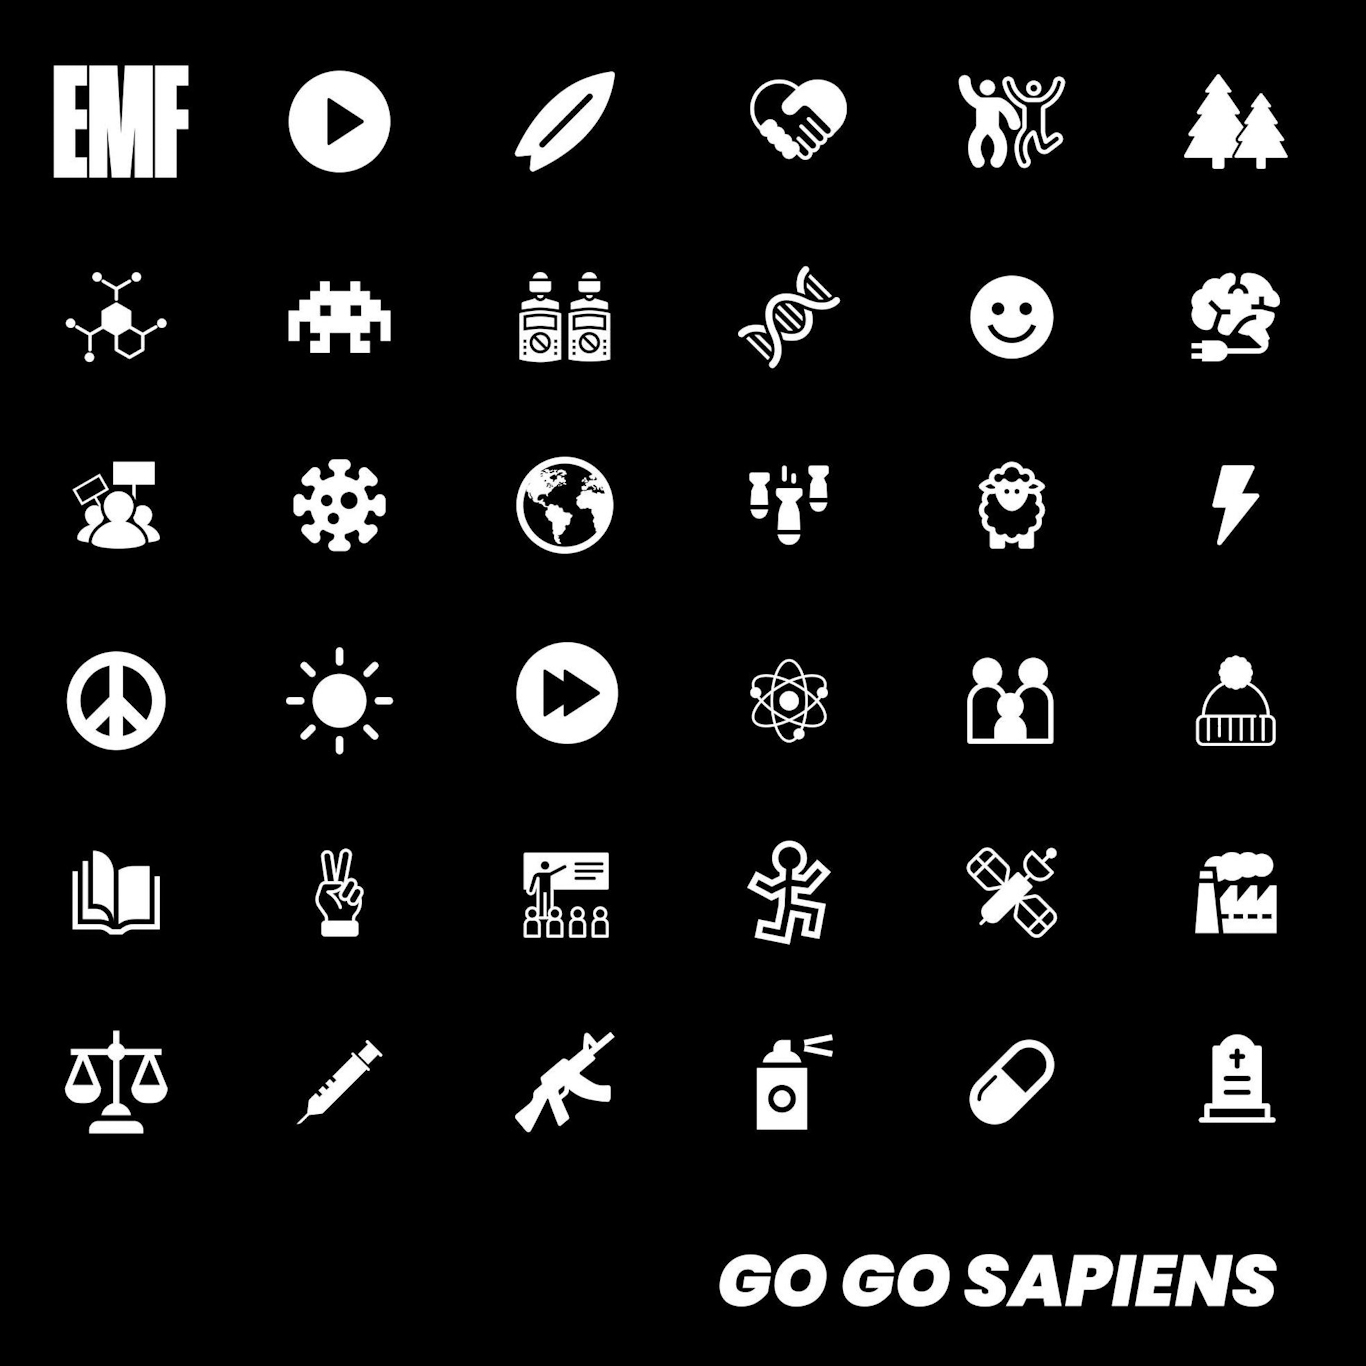 EMF are back with 'GO GO SAPIENS' their first album of all-new material since 1995 